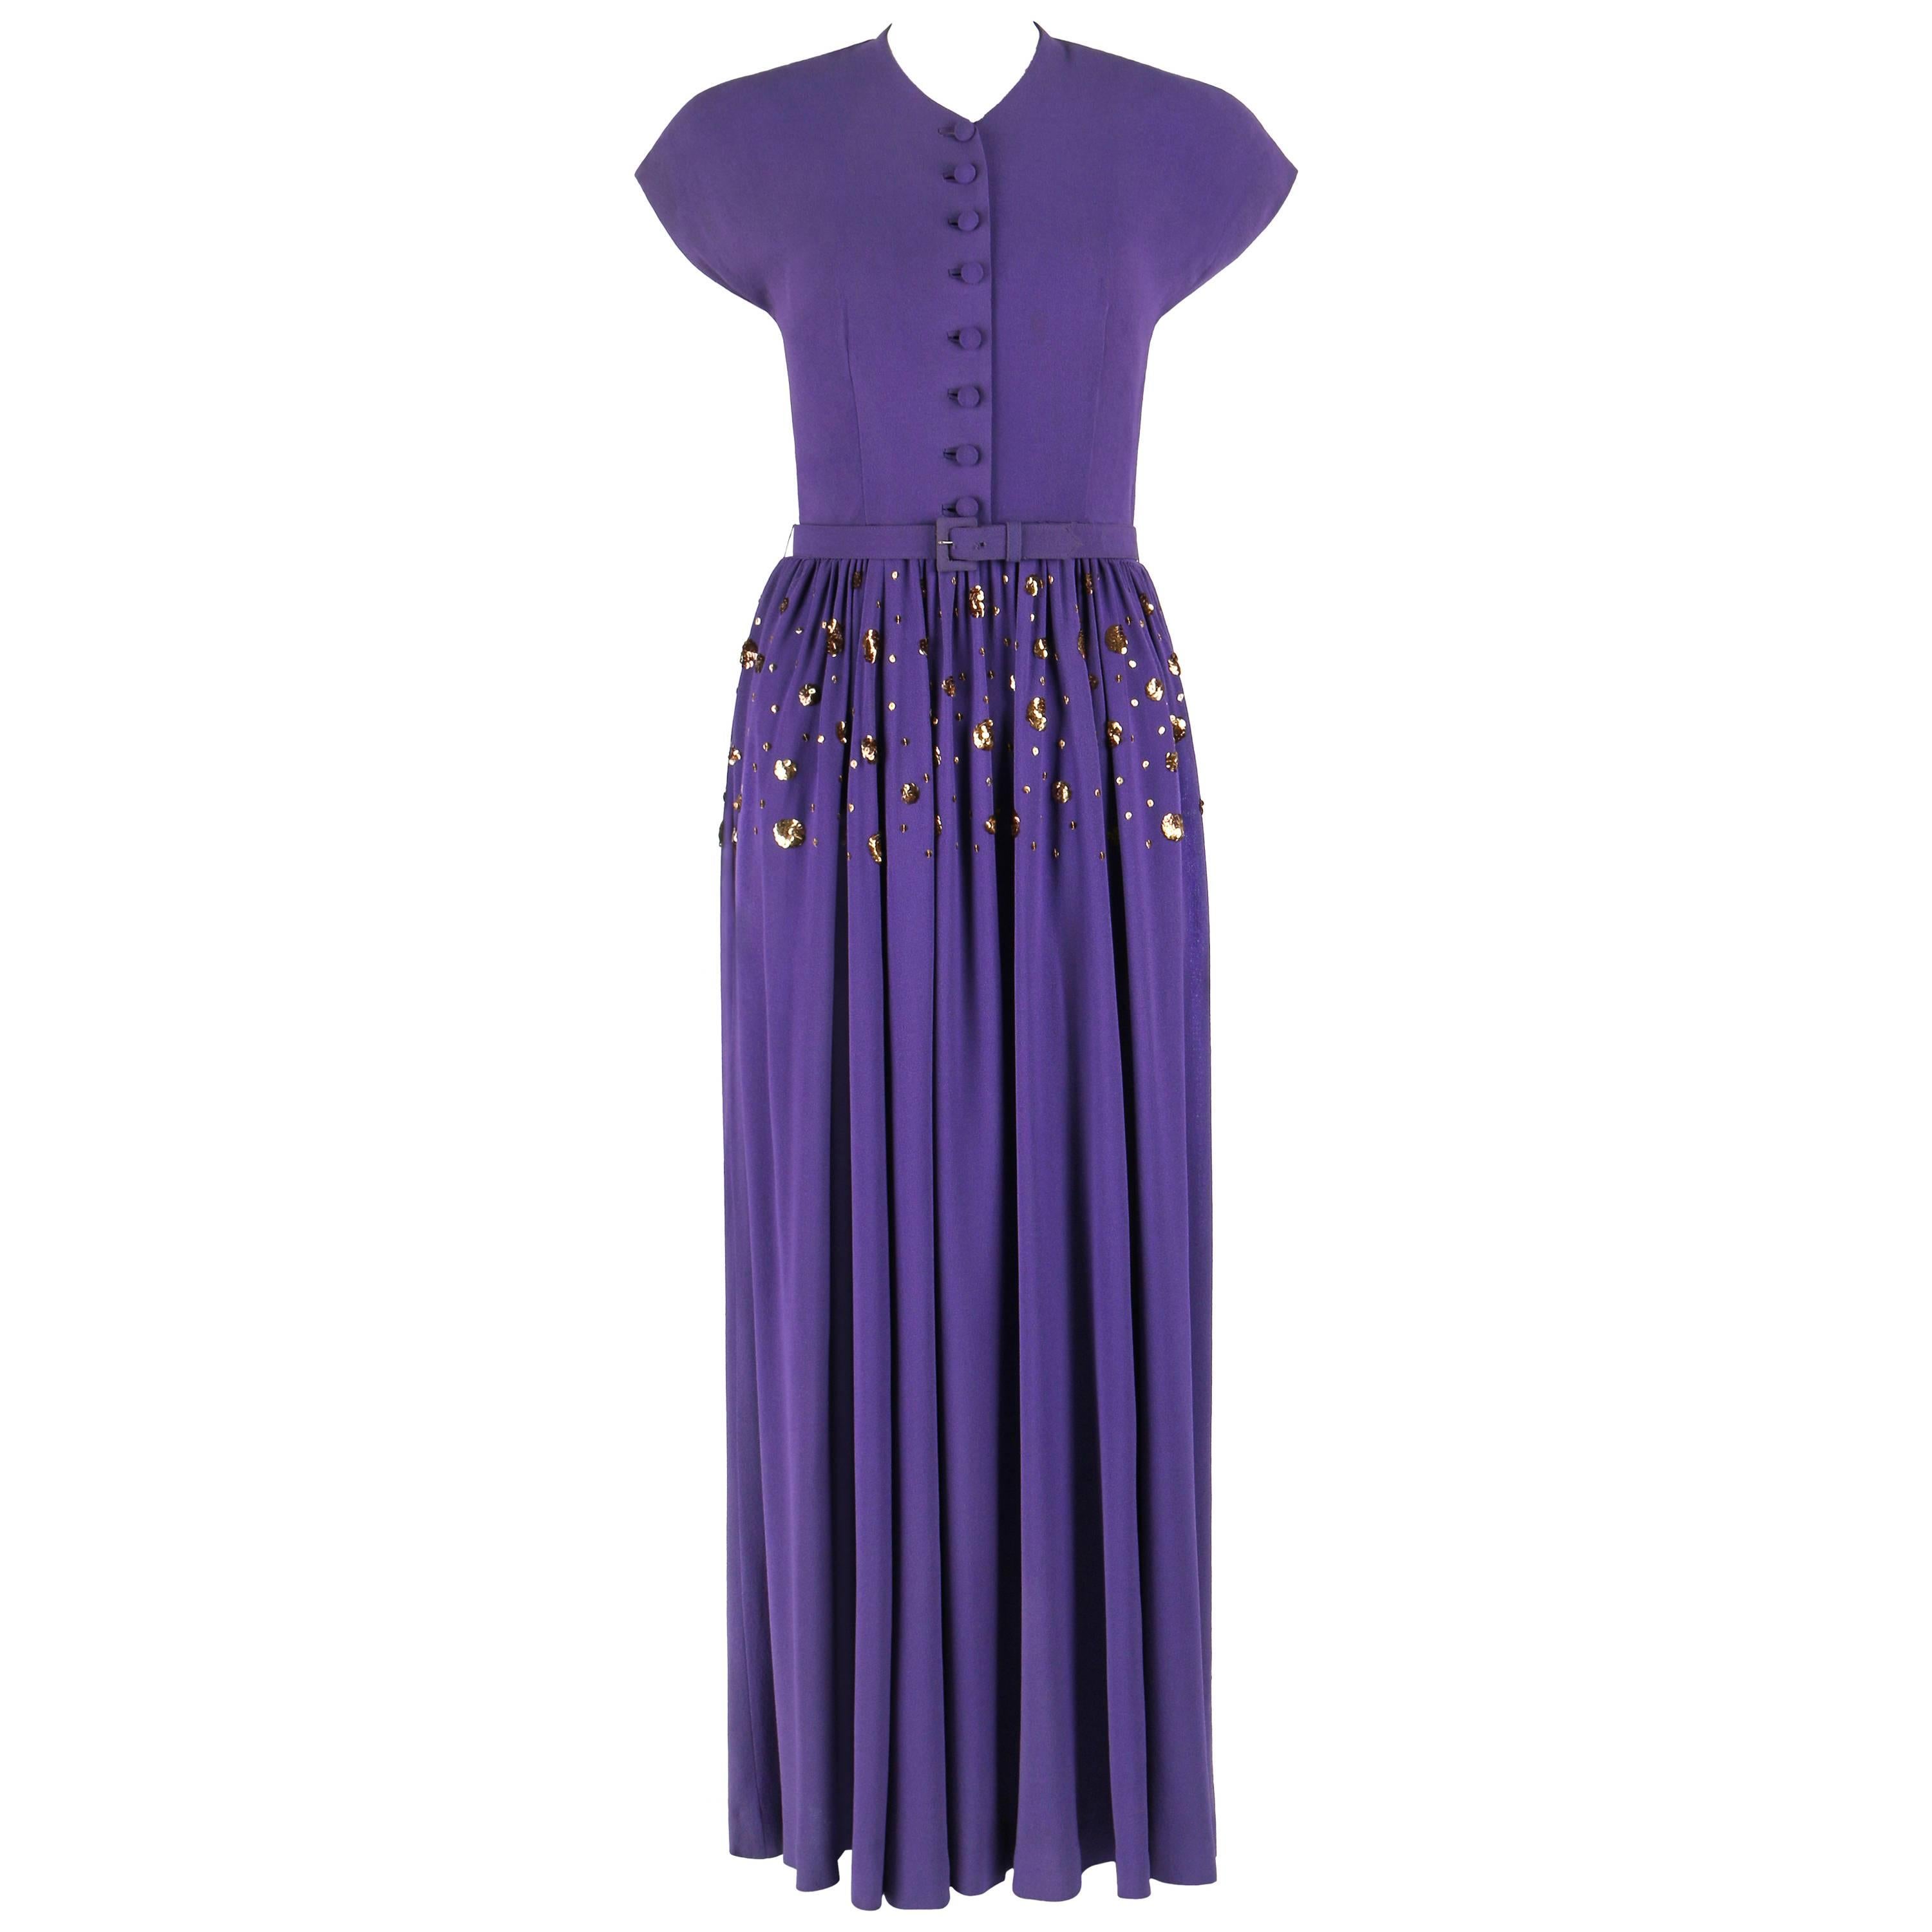 COUTURE c.1940's Purple Gold Belted Sequin Embellished Evening Dress Gown For Sale